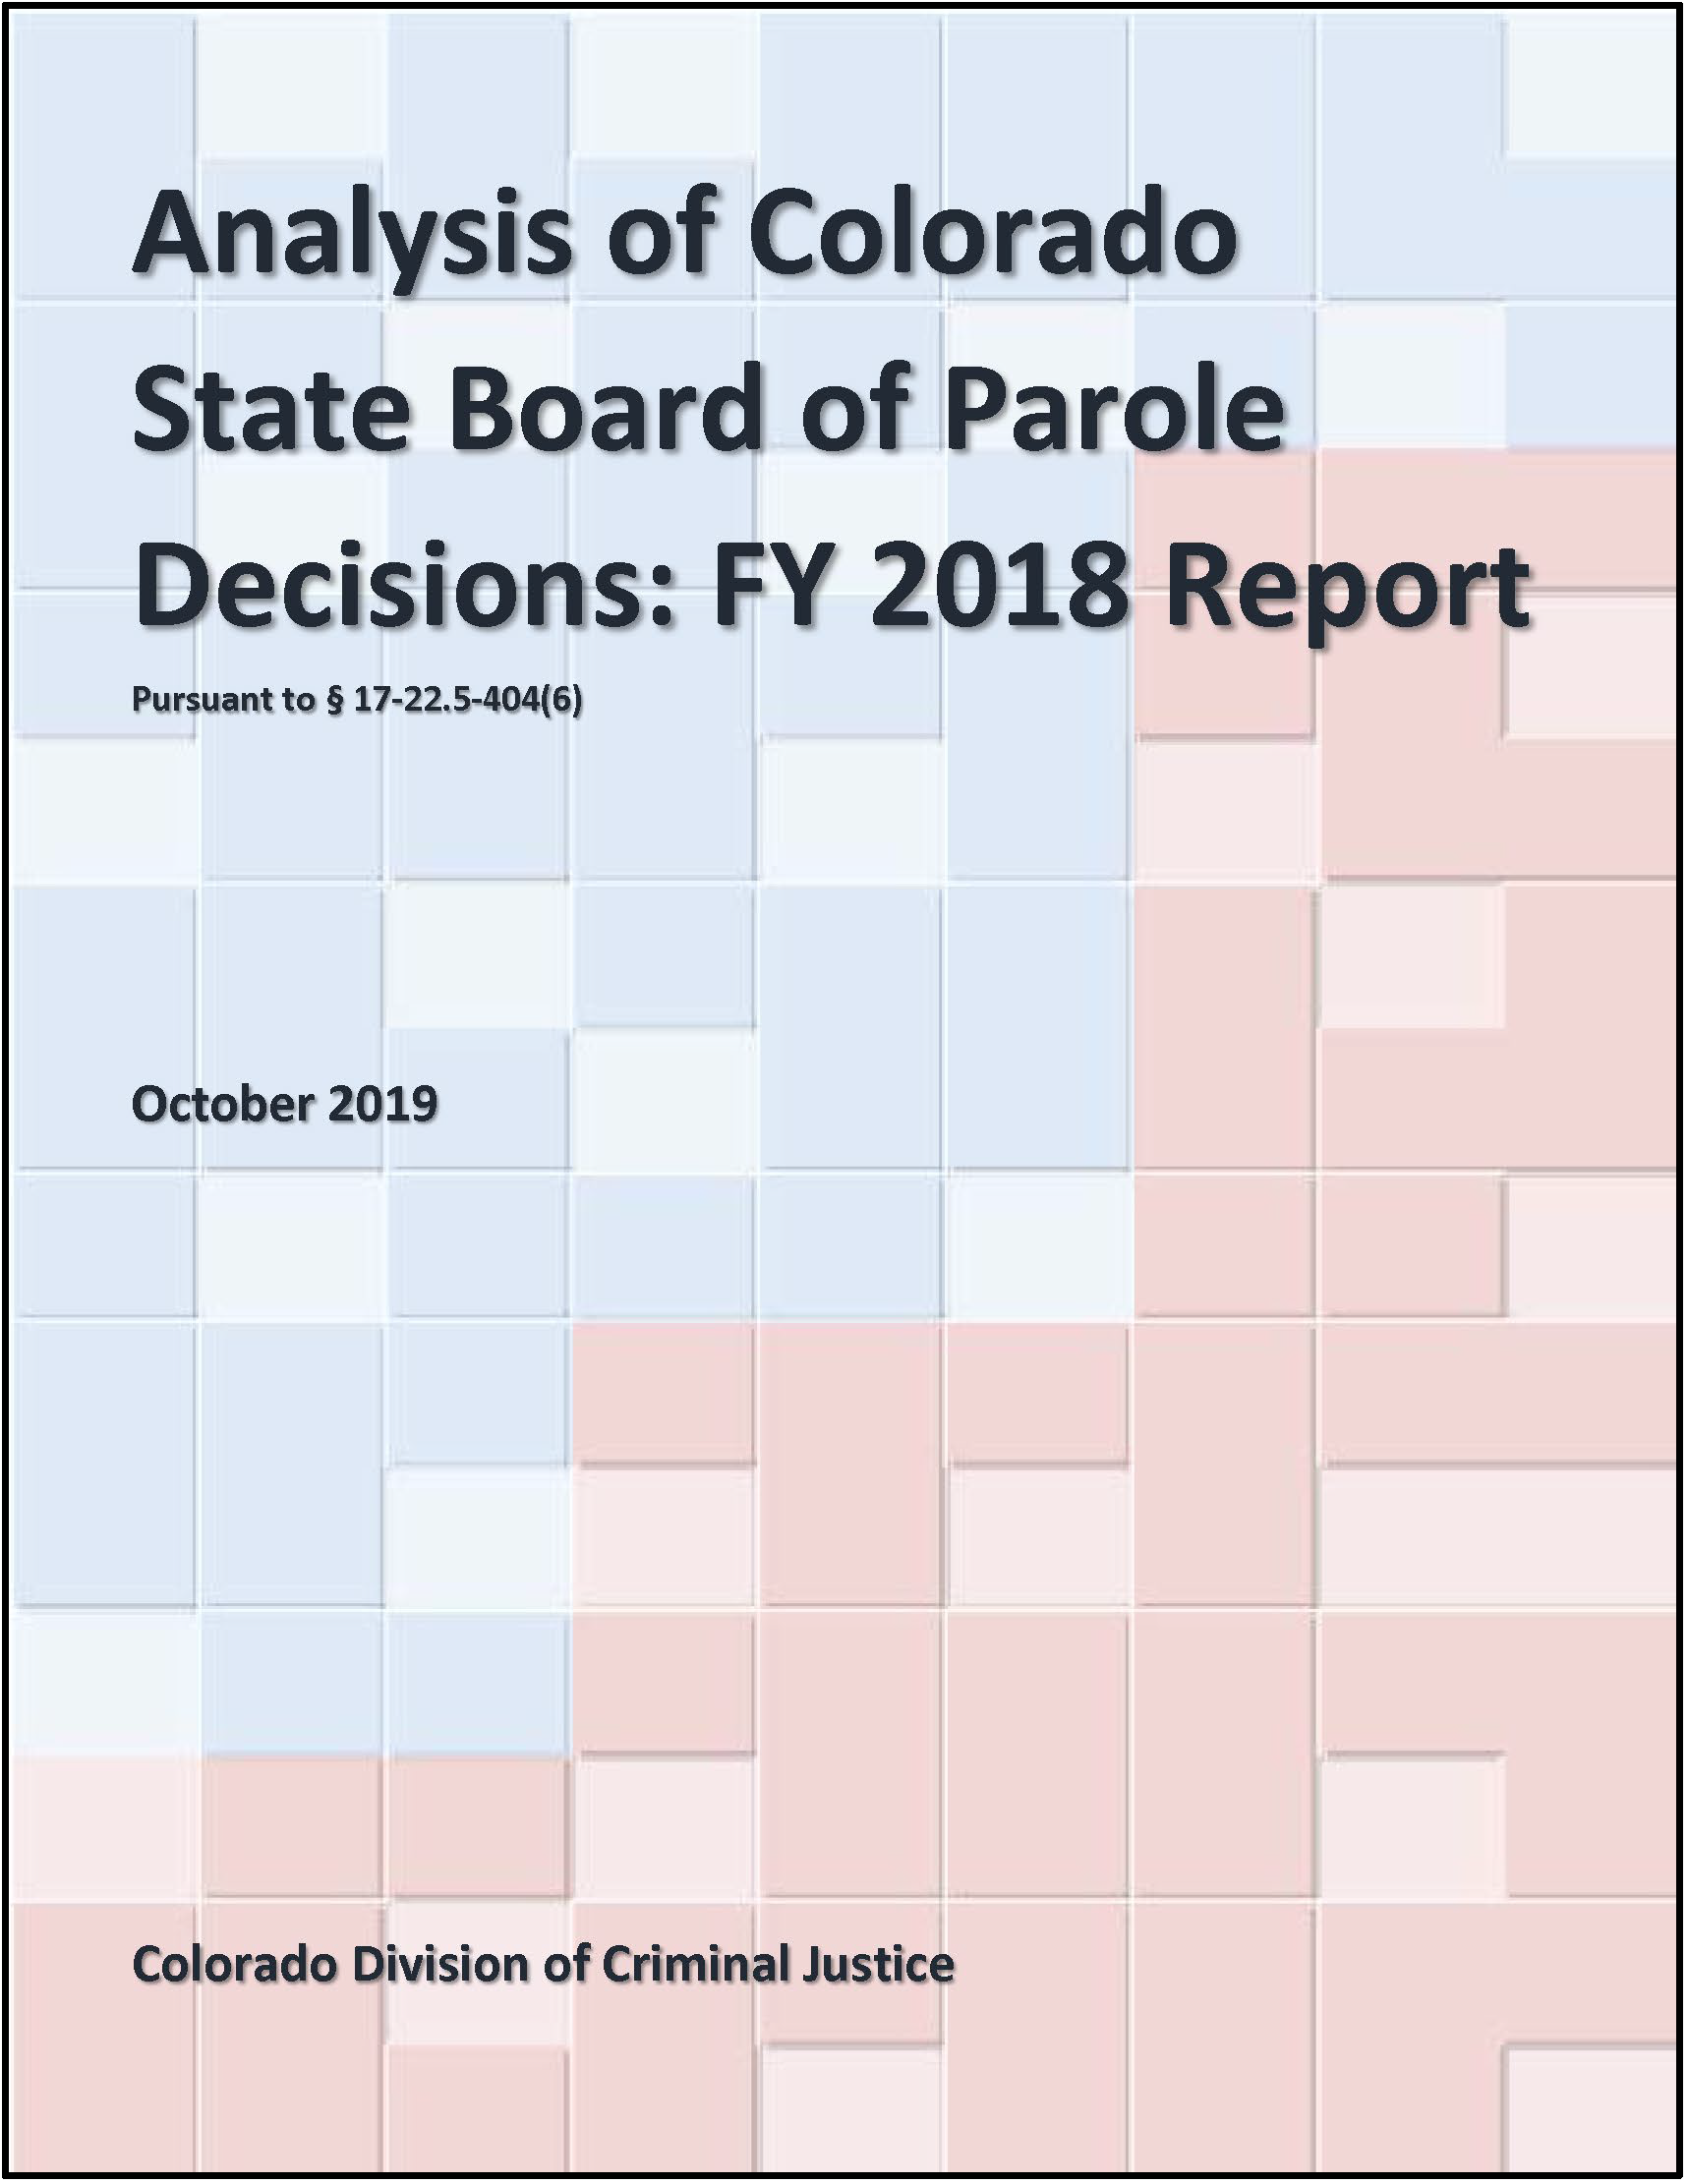 Analysis of Colorado State Board of Parole Decisions: FY 2018 Report (October 2019)